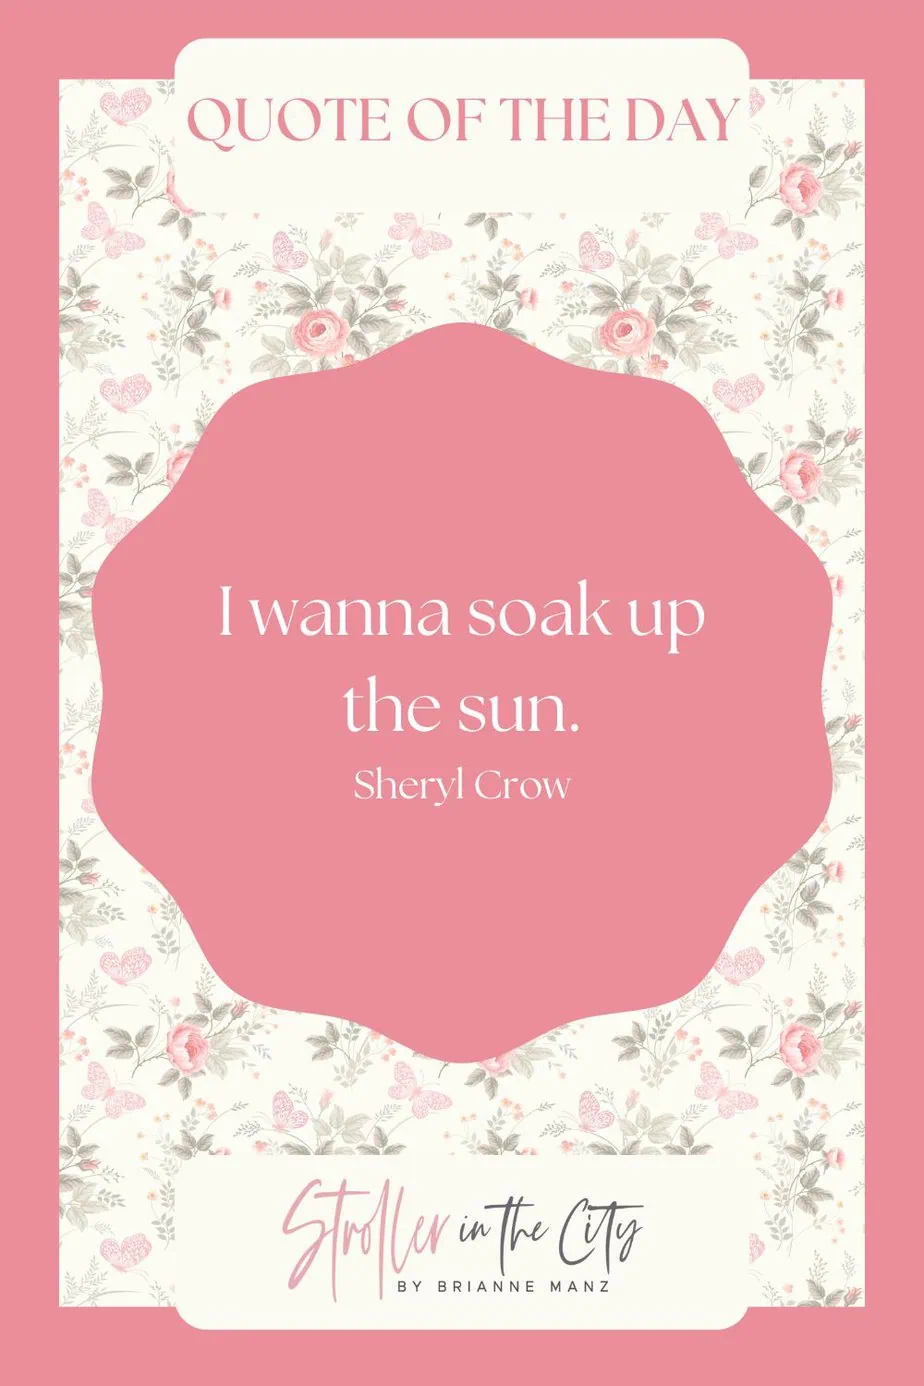 sunscreen quote